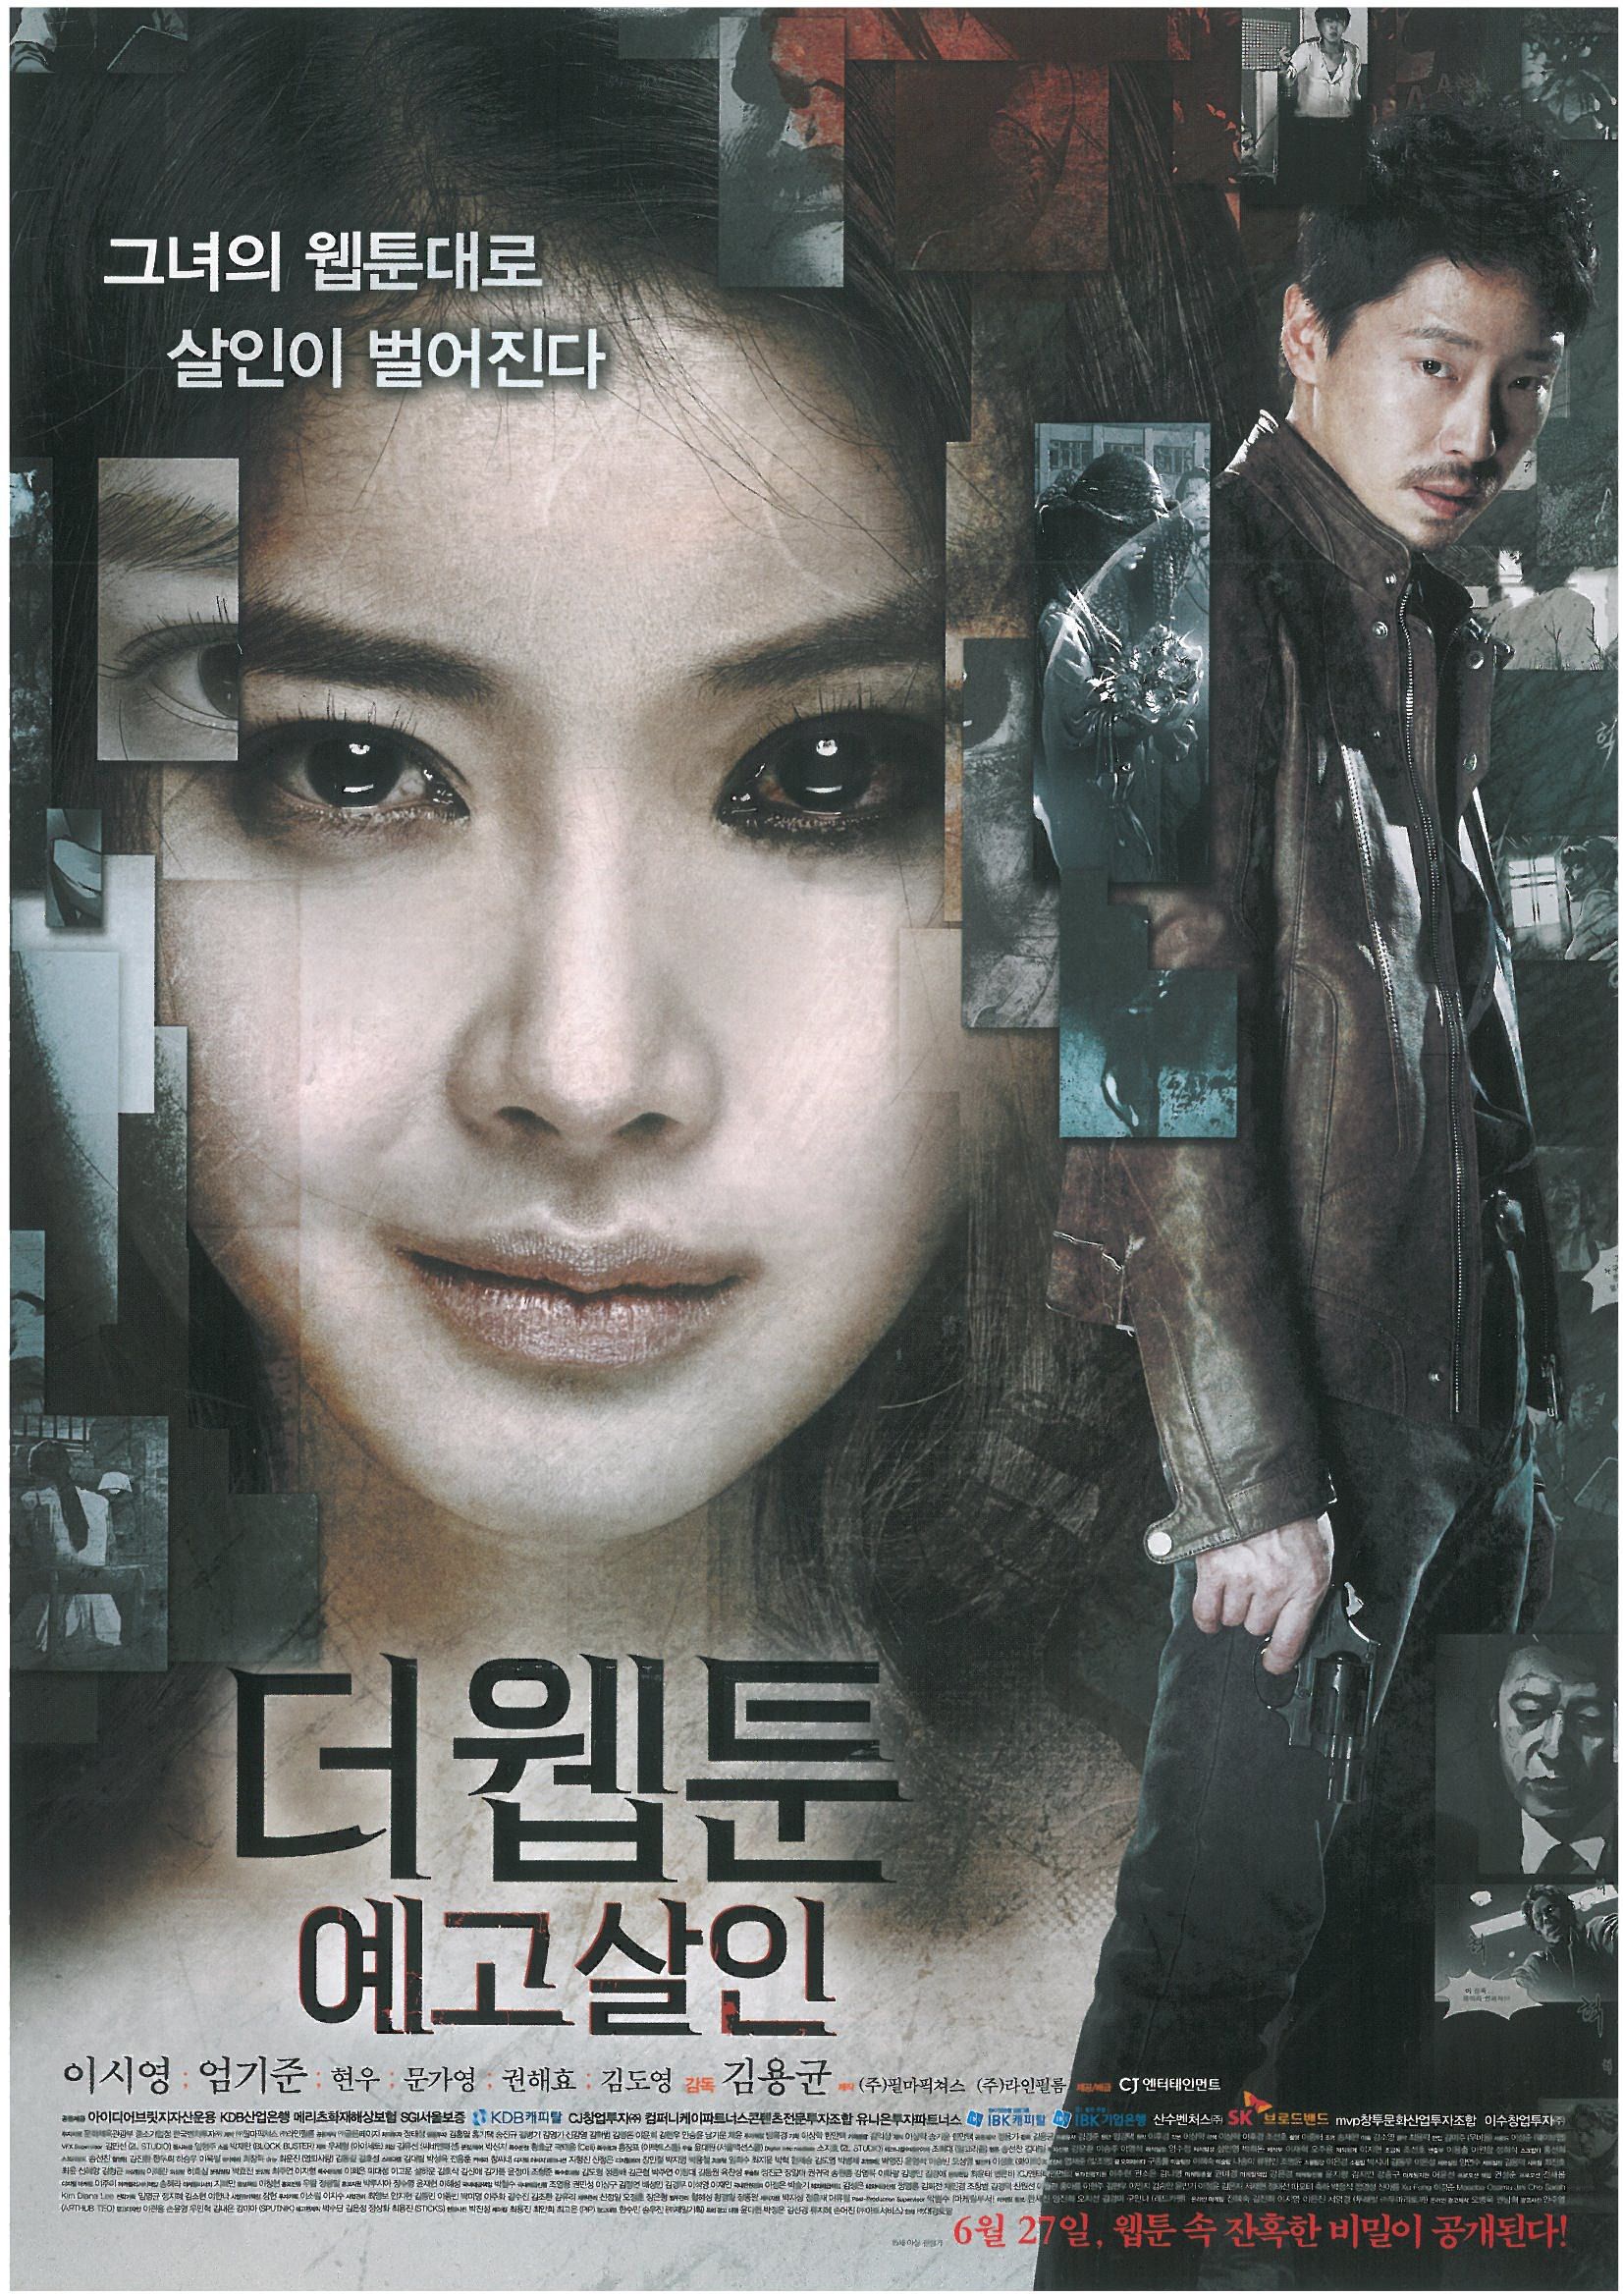 Lee Si Young Movies and TV Shows